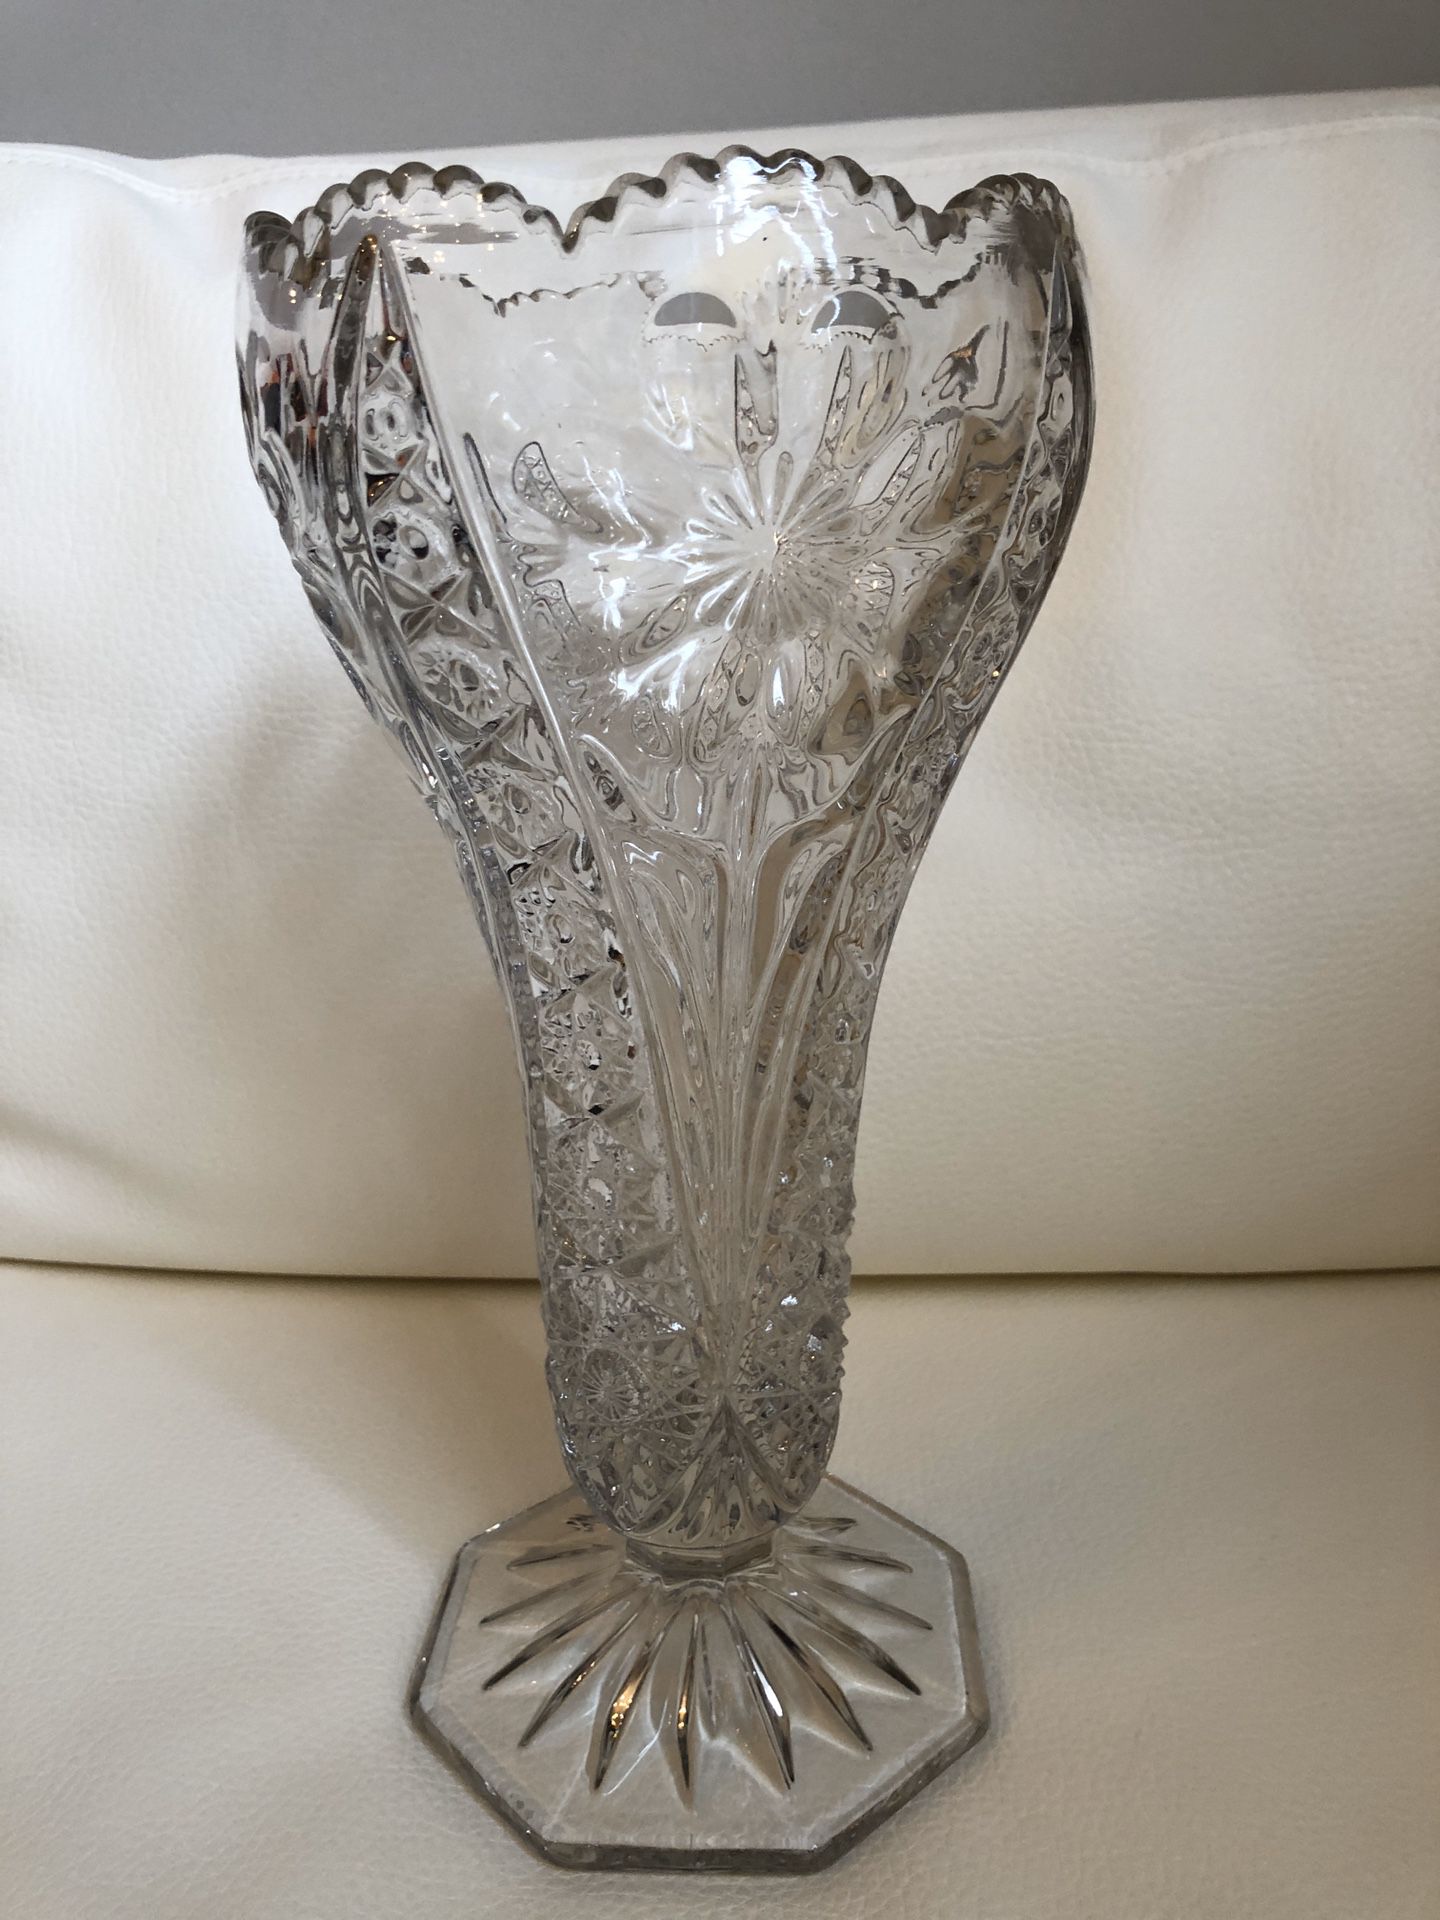 Tall 12”x5.5” Vase from Europe